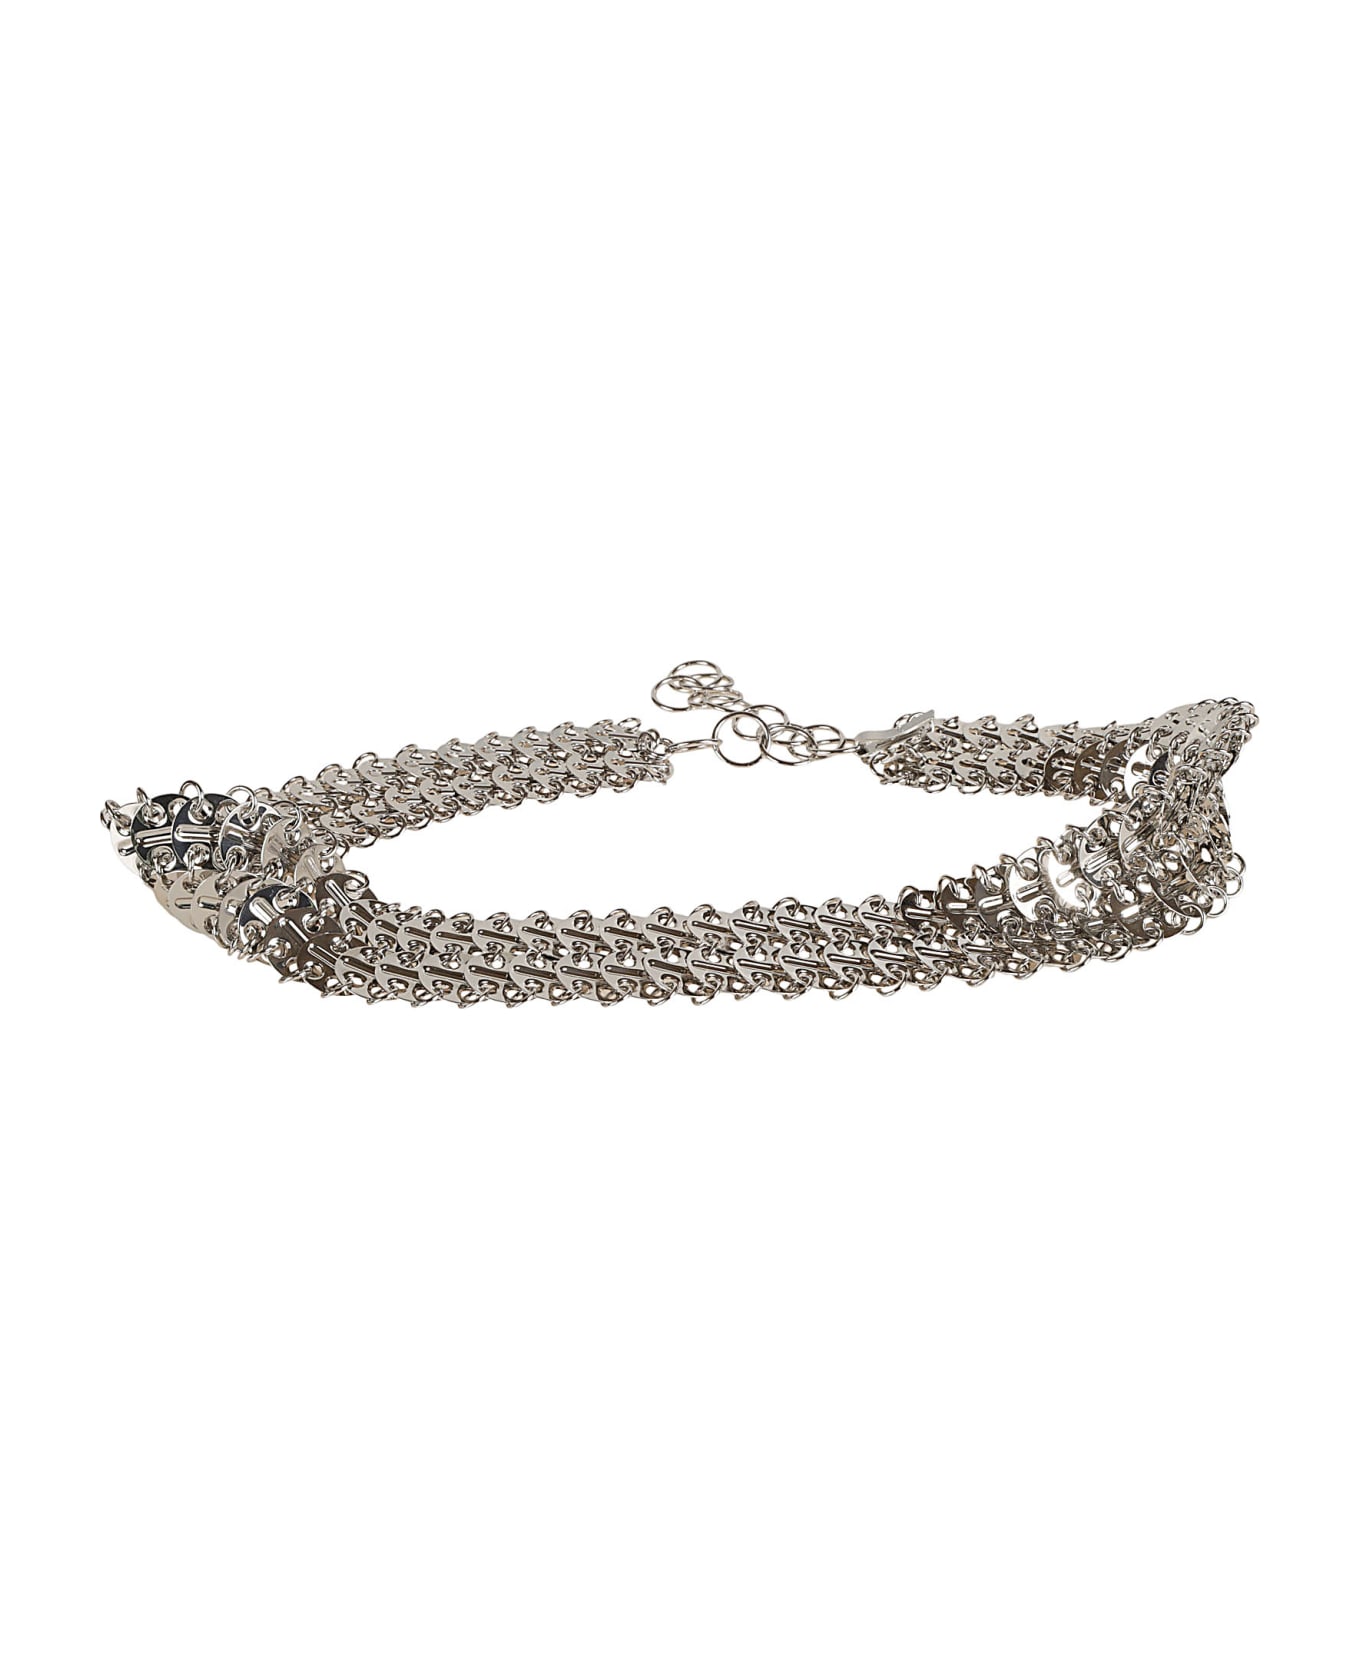 Paco Rabanne Chainmail Bracelet - Silver ブレスレット